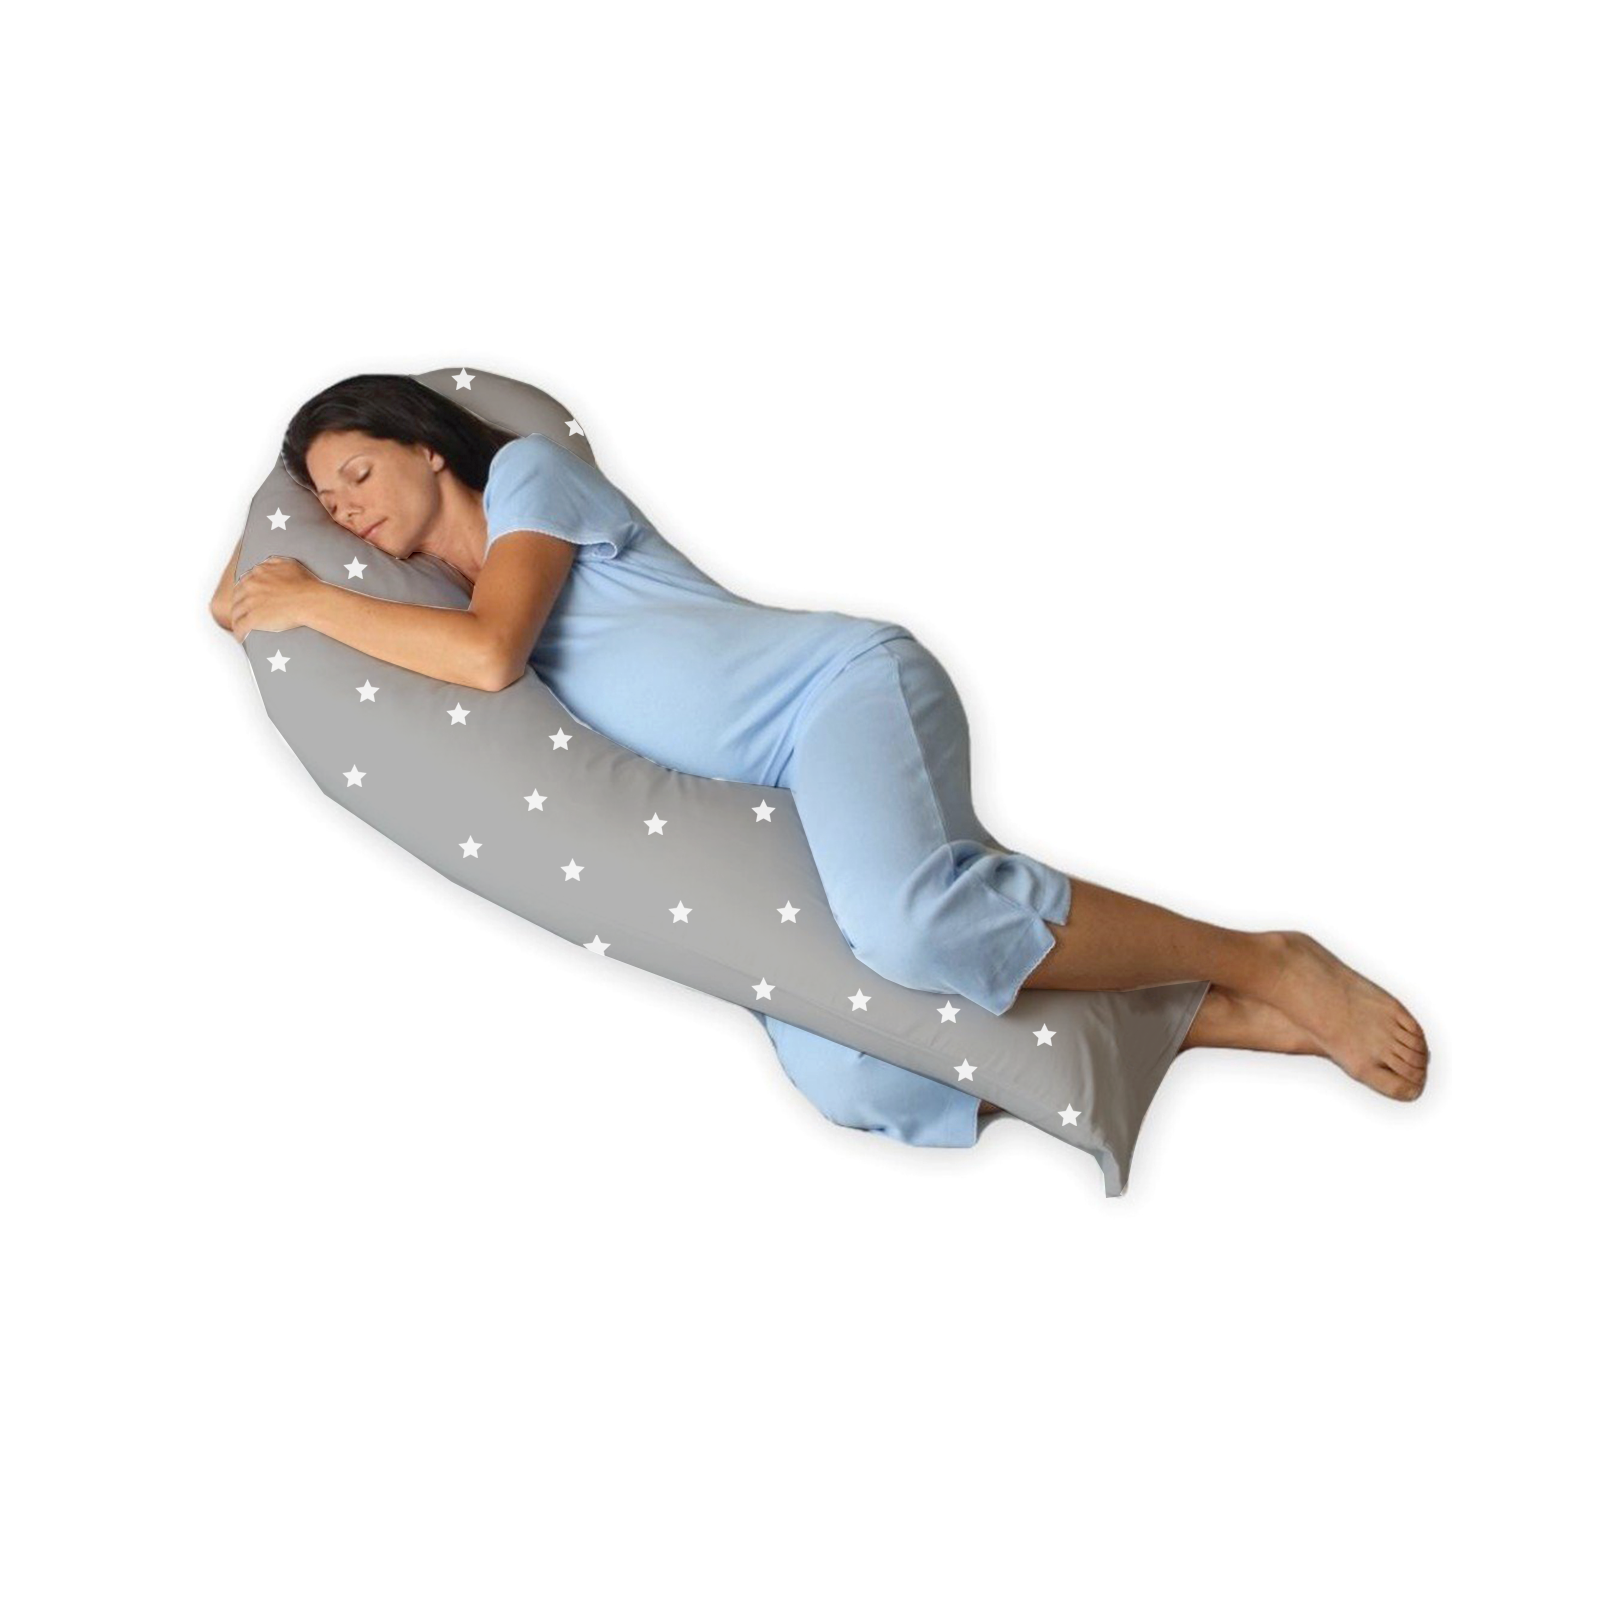 4baby 6ft Deluxe Body & Baby Support Pillow - Grey / White Stars